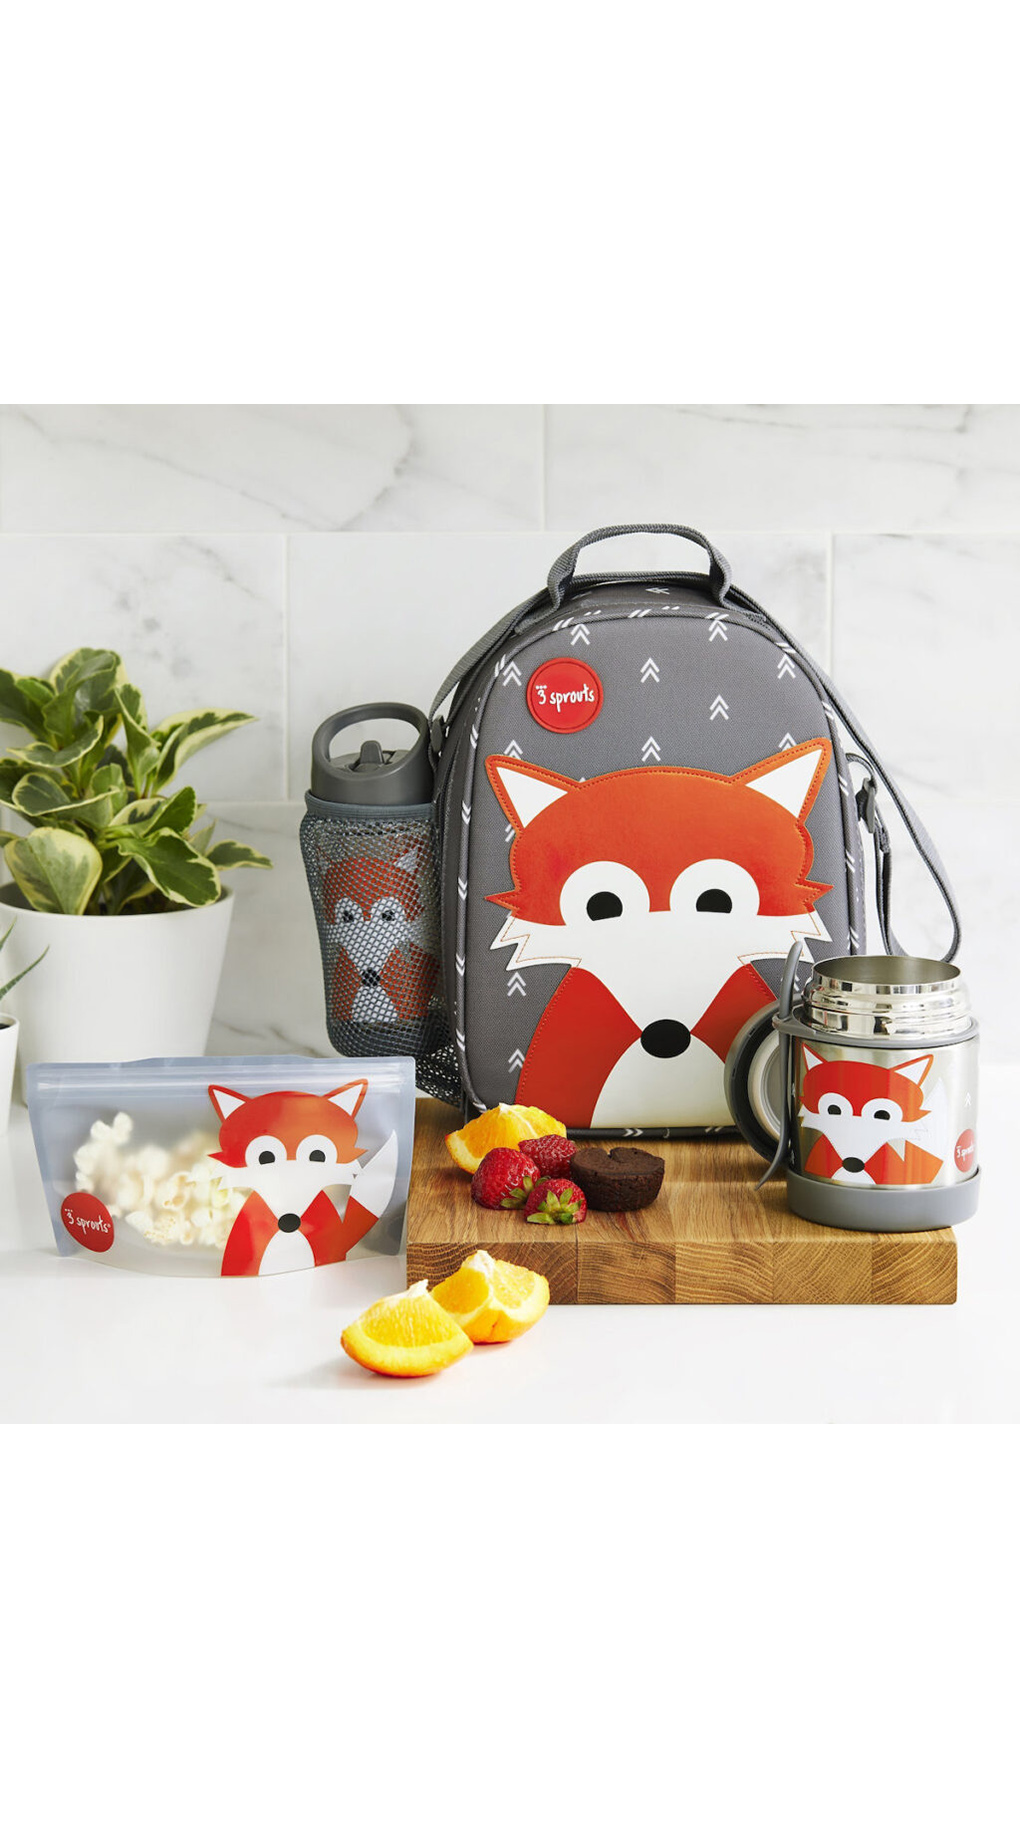 3sprouts lunch bag fox - 3 sprouts